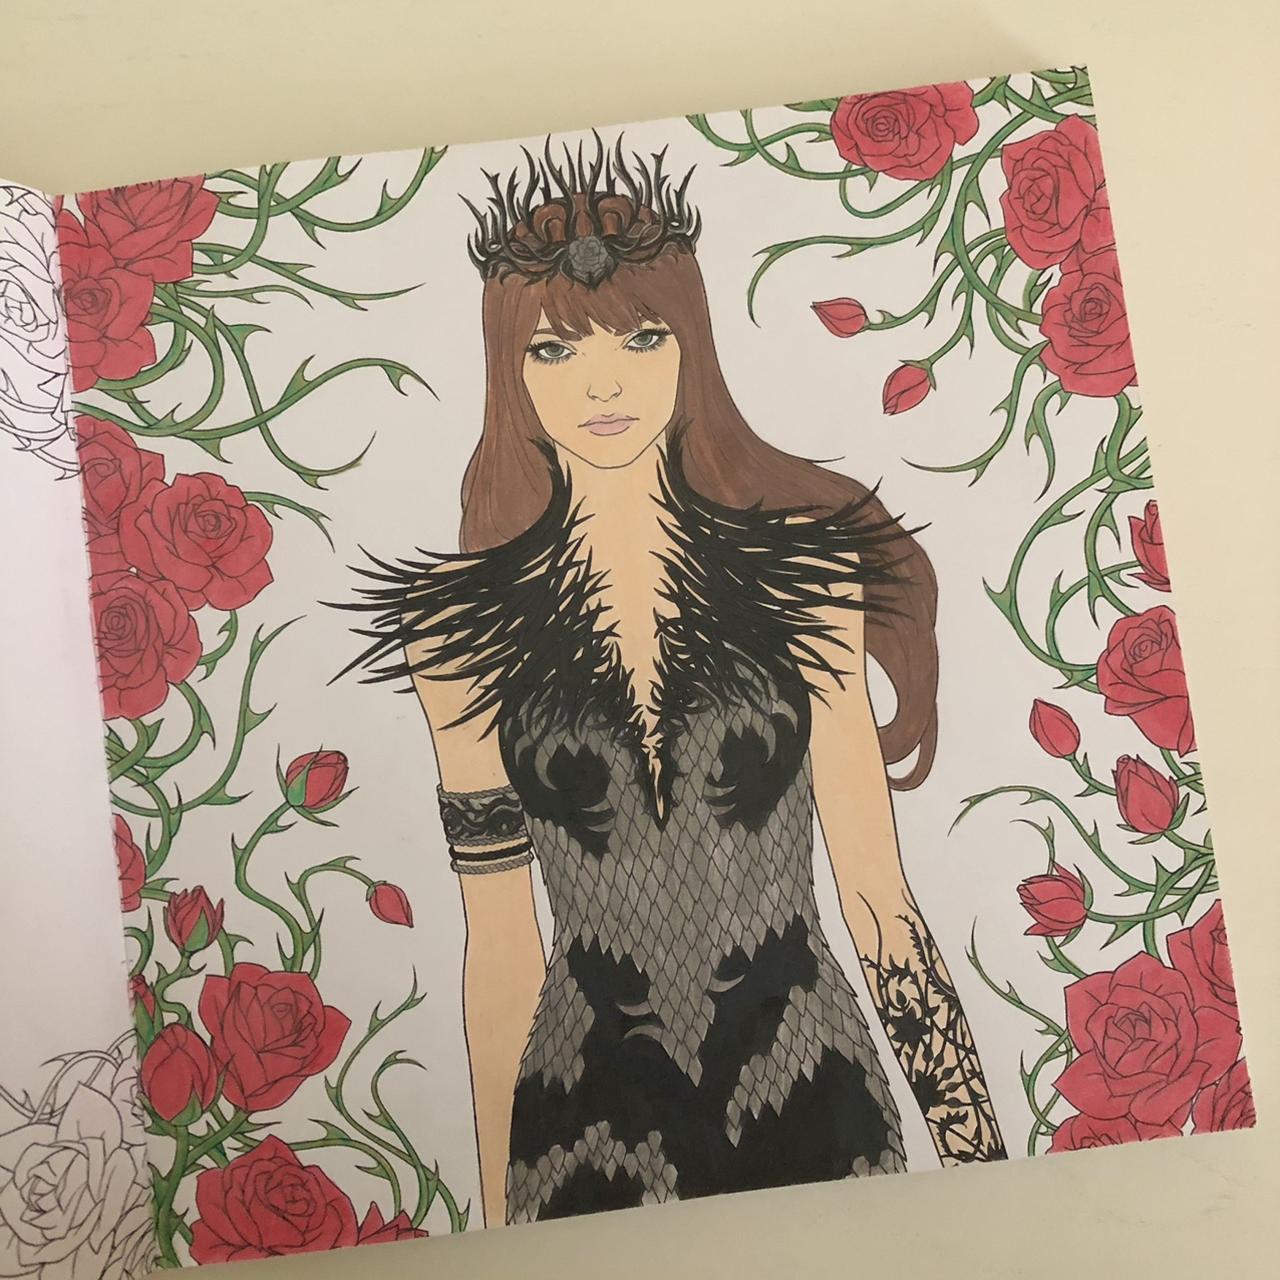 ACOTAR COLORING BOOK 🌹 out of print, extremely rare - Depop